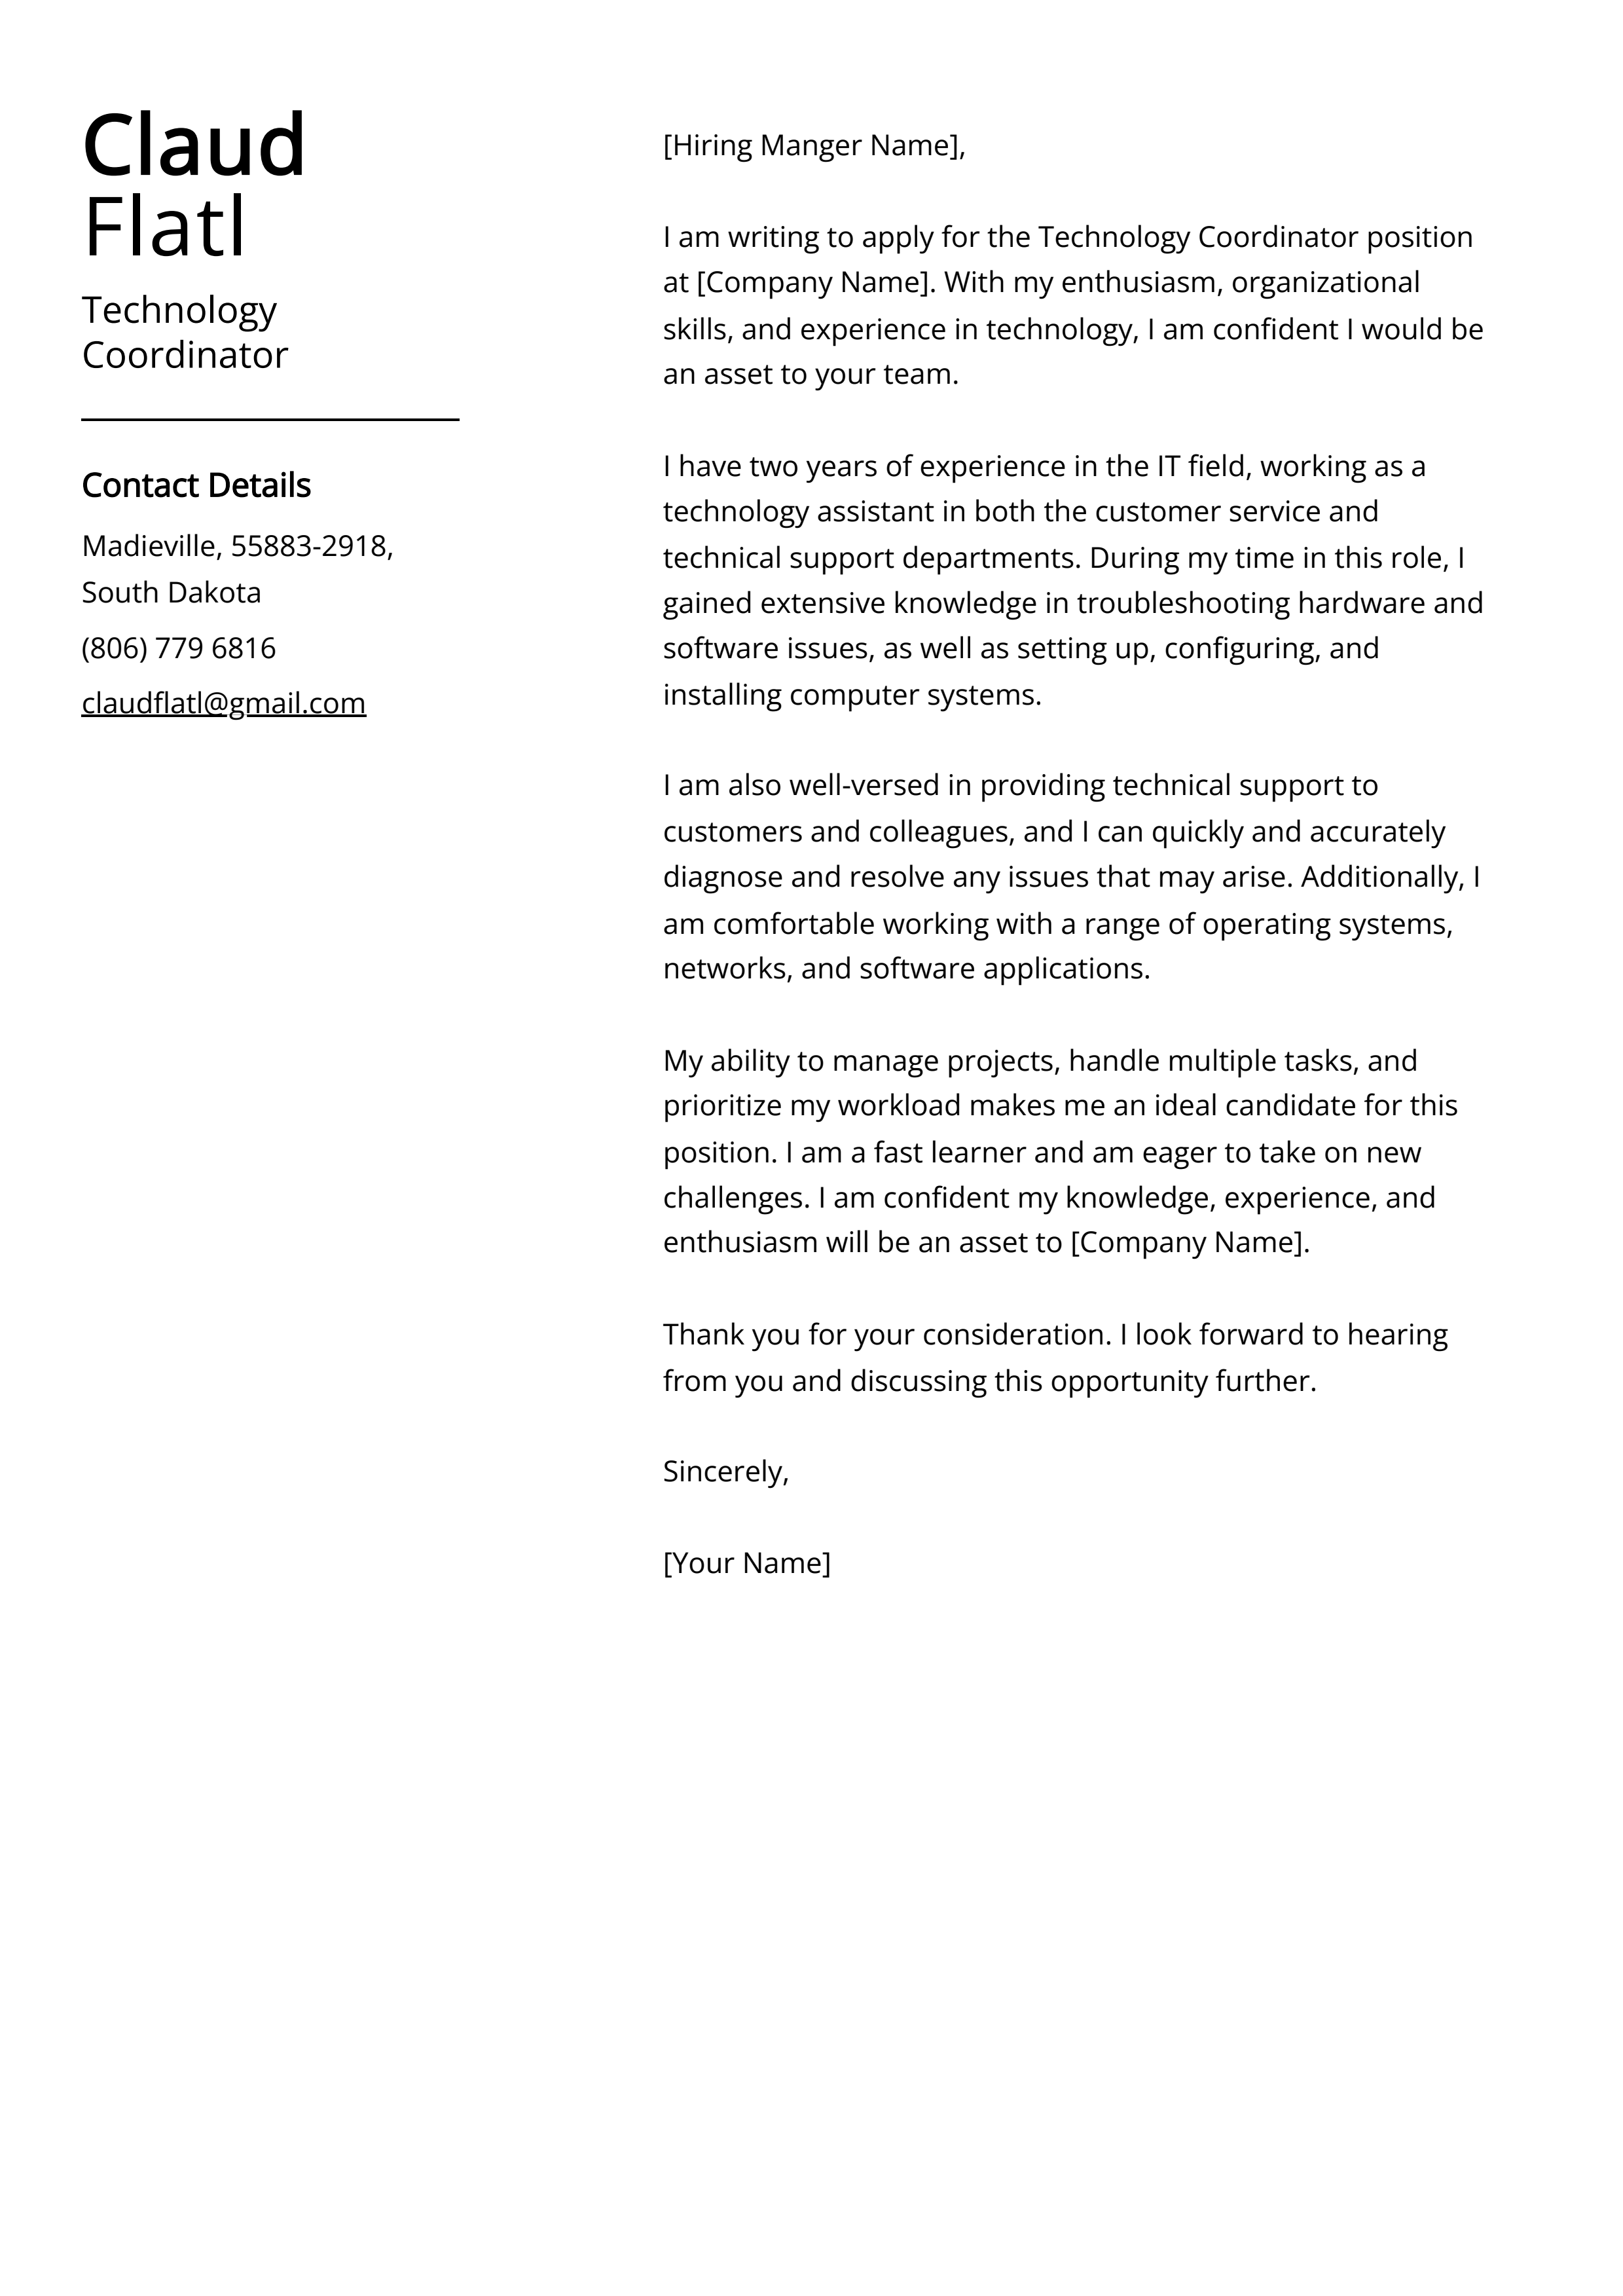 Technology Coordinator Cover Letter Example